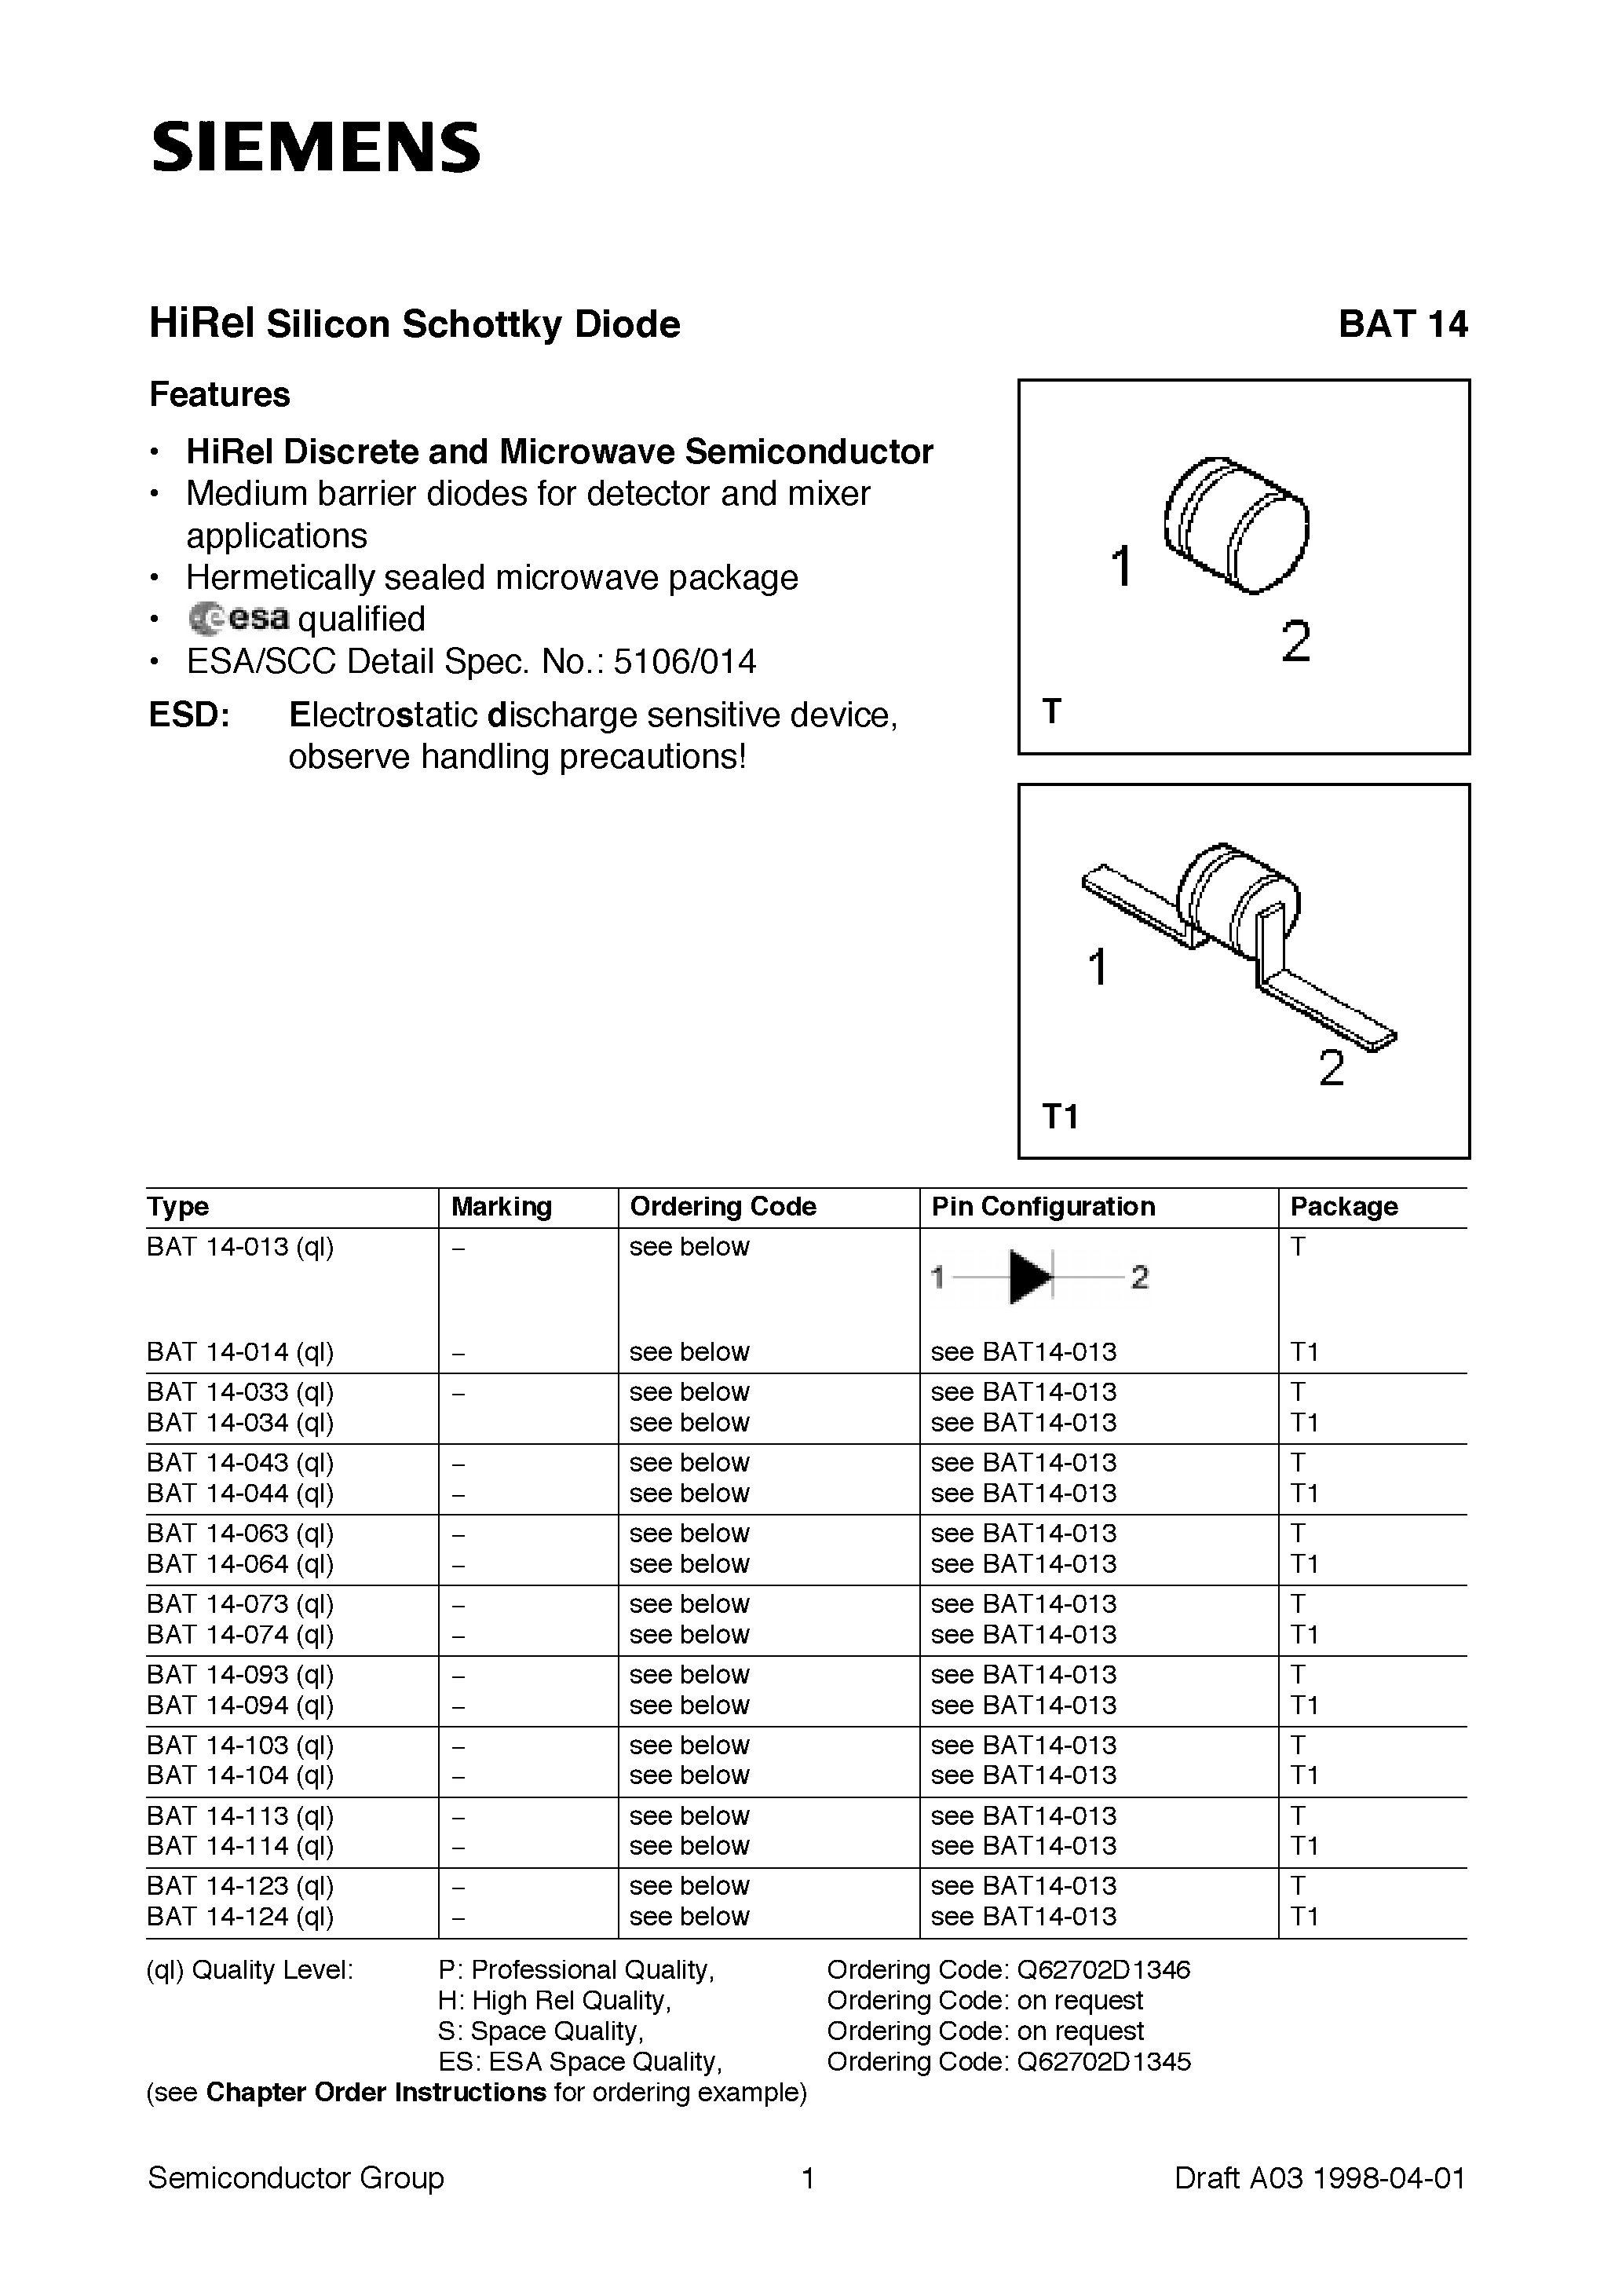 Datasheet BAT14 - HiRel Silicon Schottky Diode (HiRel Discrete and Microwave Semiconductor Medium barrier diodes for detector and mixer applications) page 1